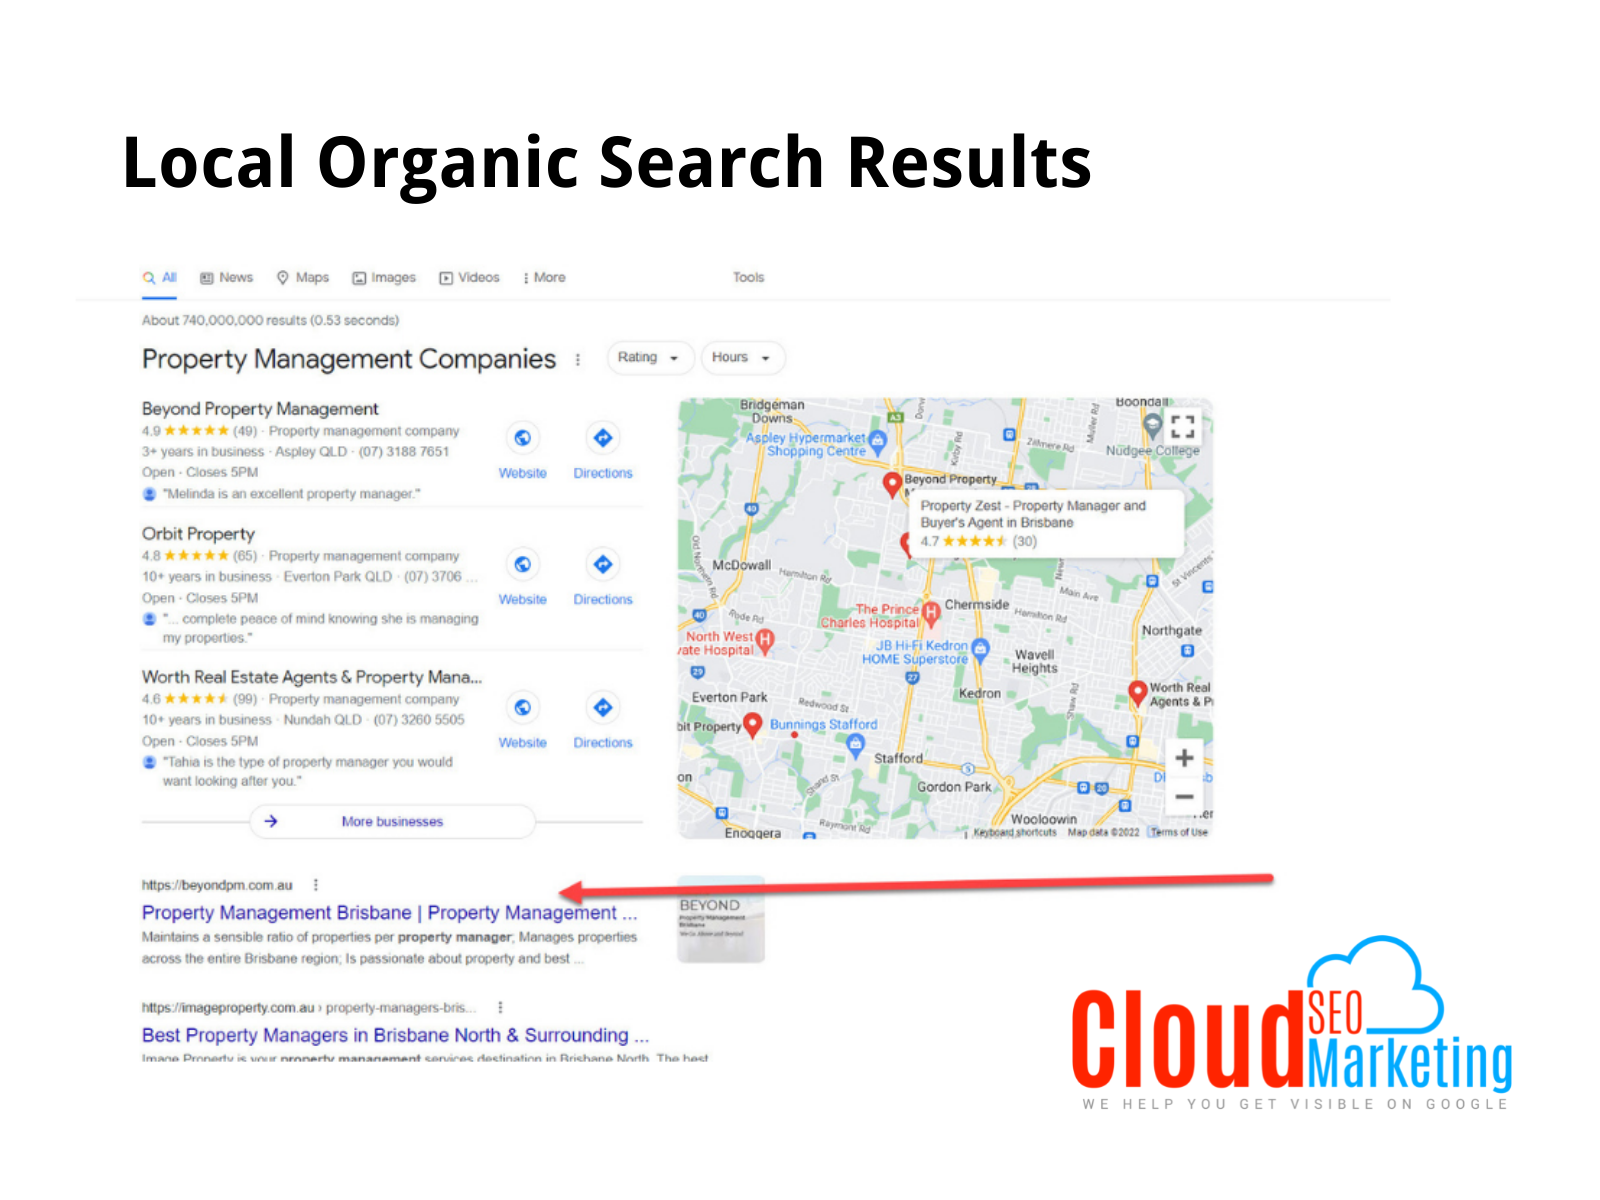 Get Your HVAC Business On Google Page 1 In Brisbane With SEO White-Hat Tactics